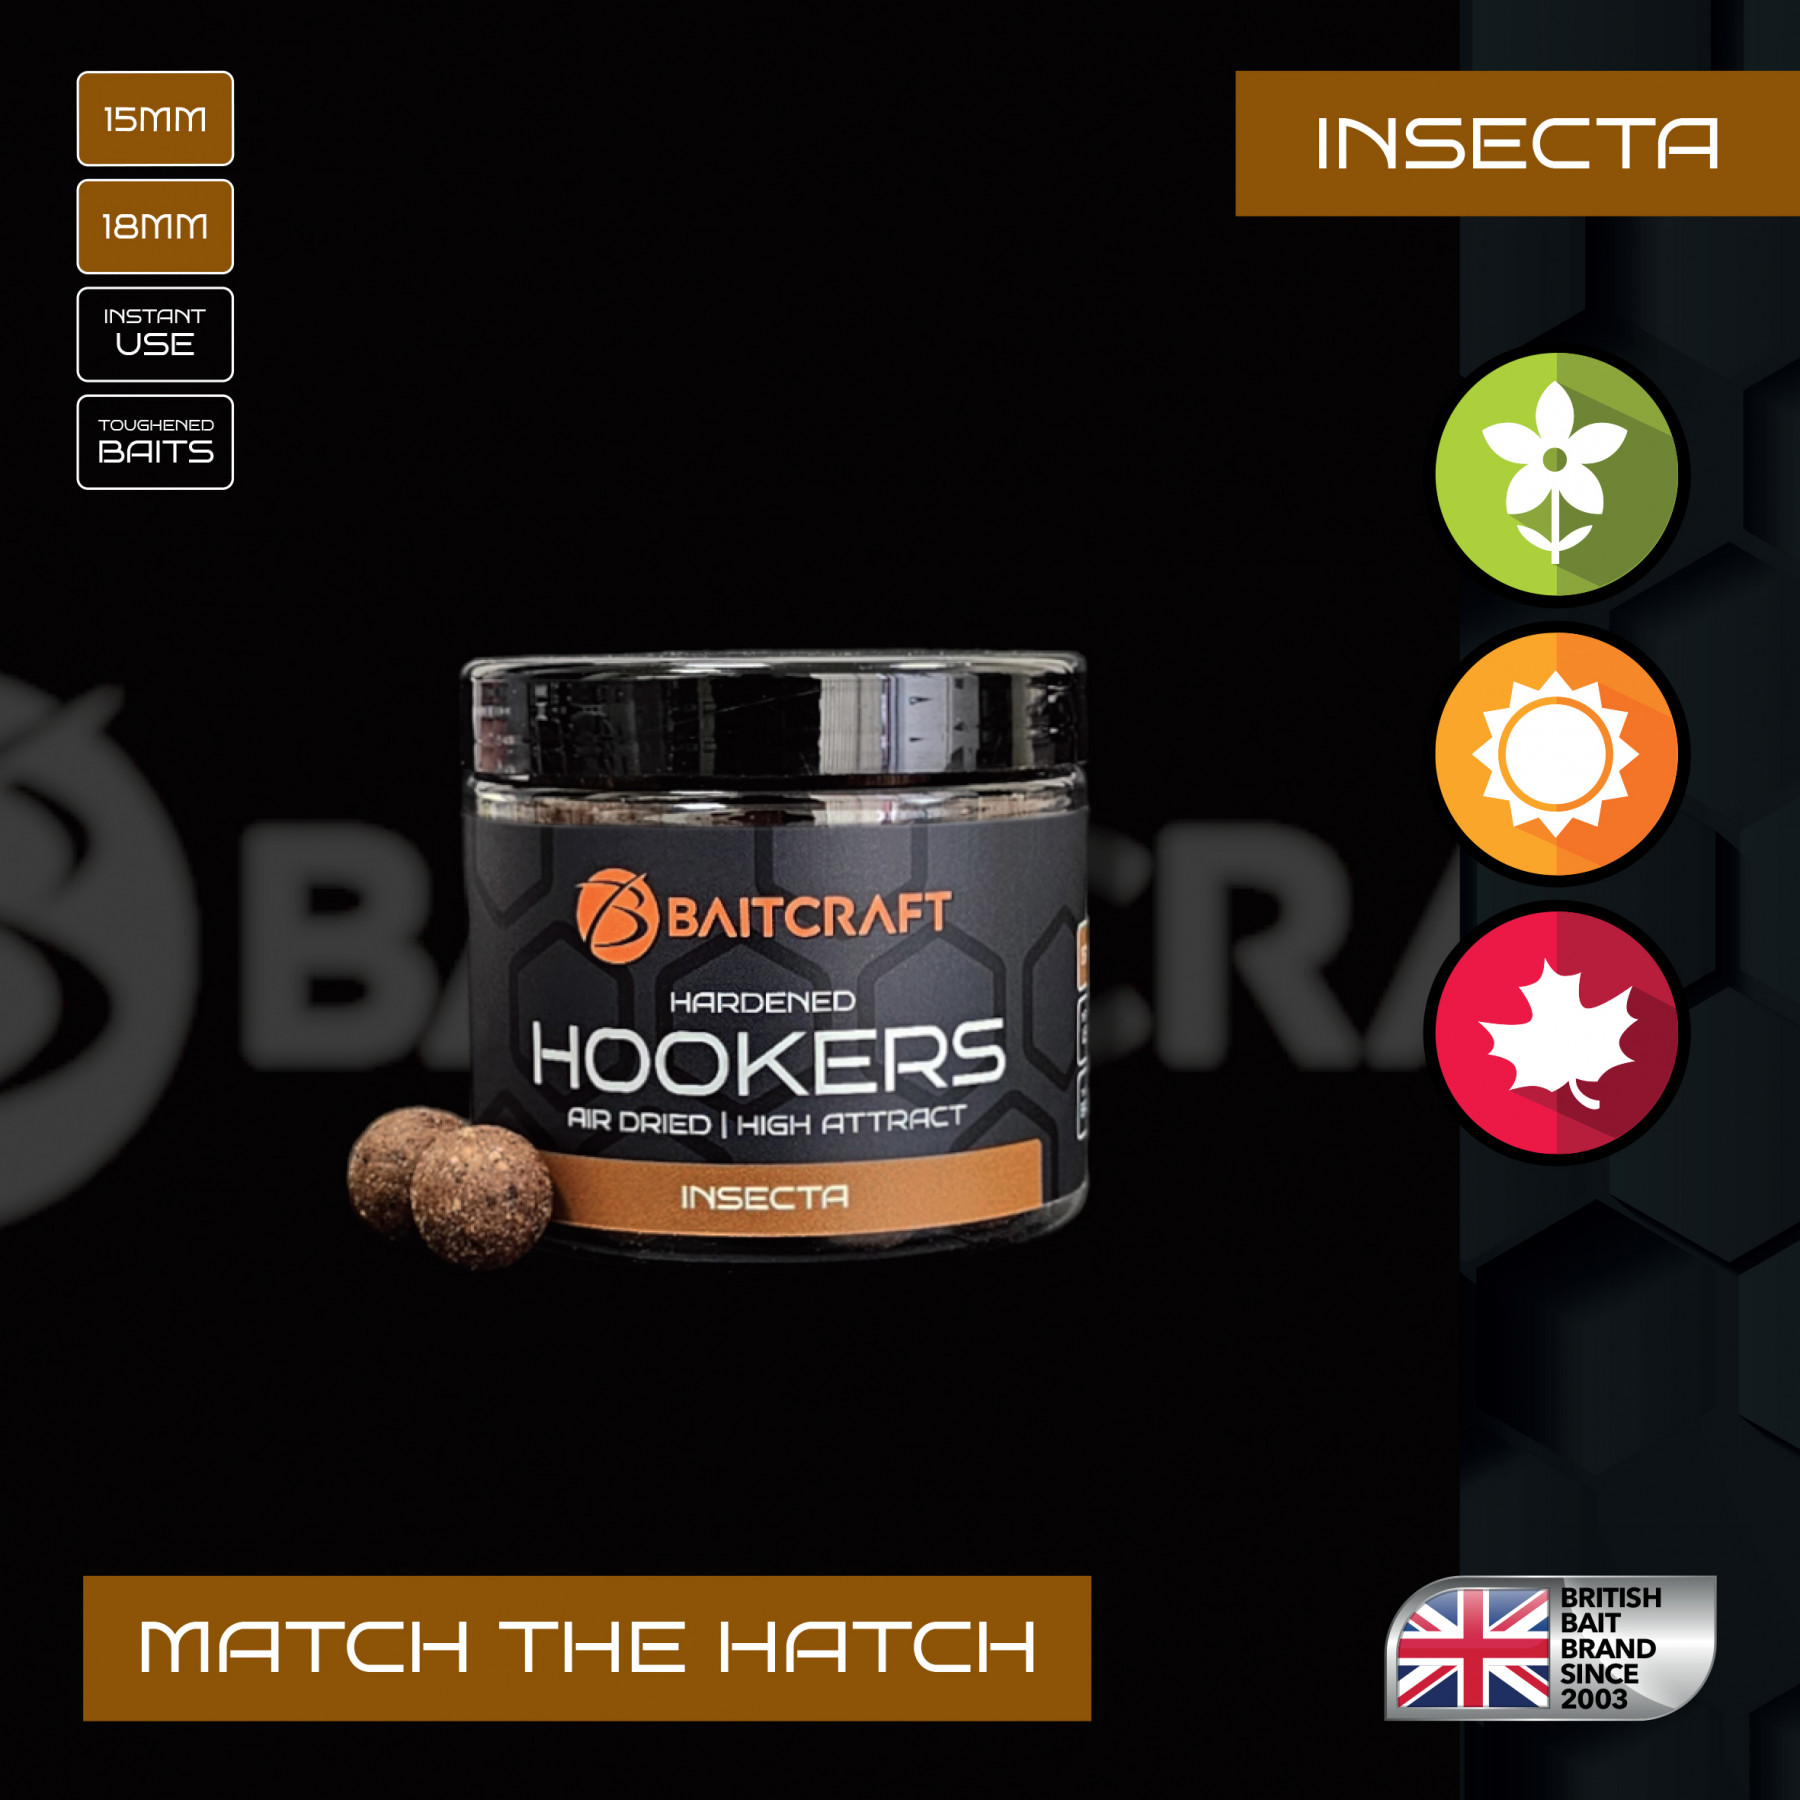 BAITCRAFT INSECTA MATCH THE HATCH HARDENED HOOKERS